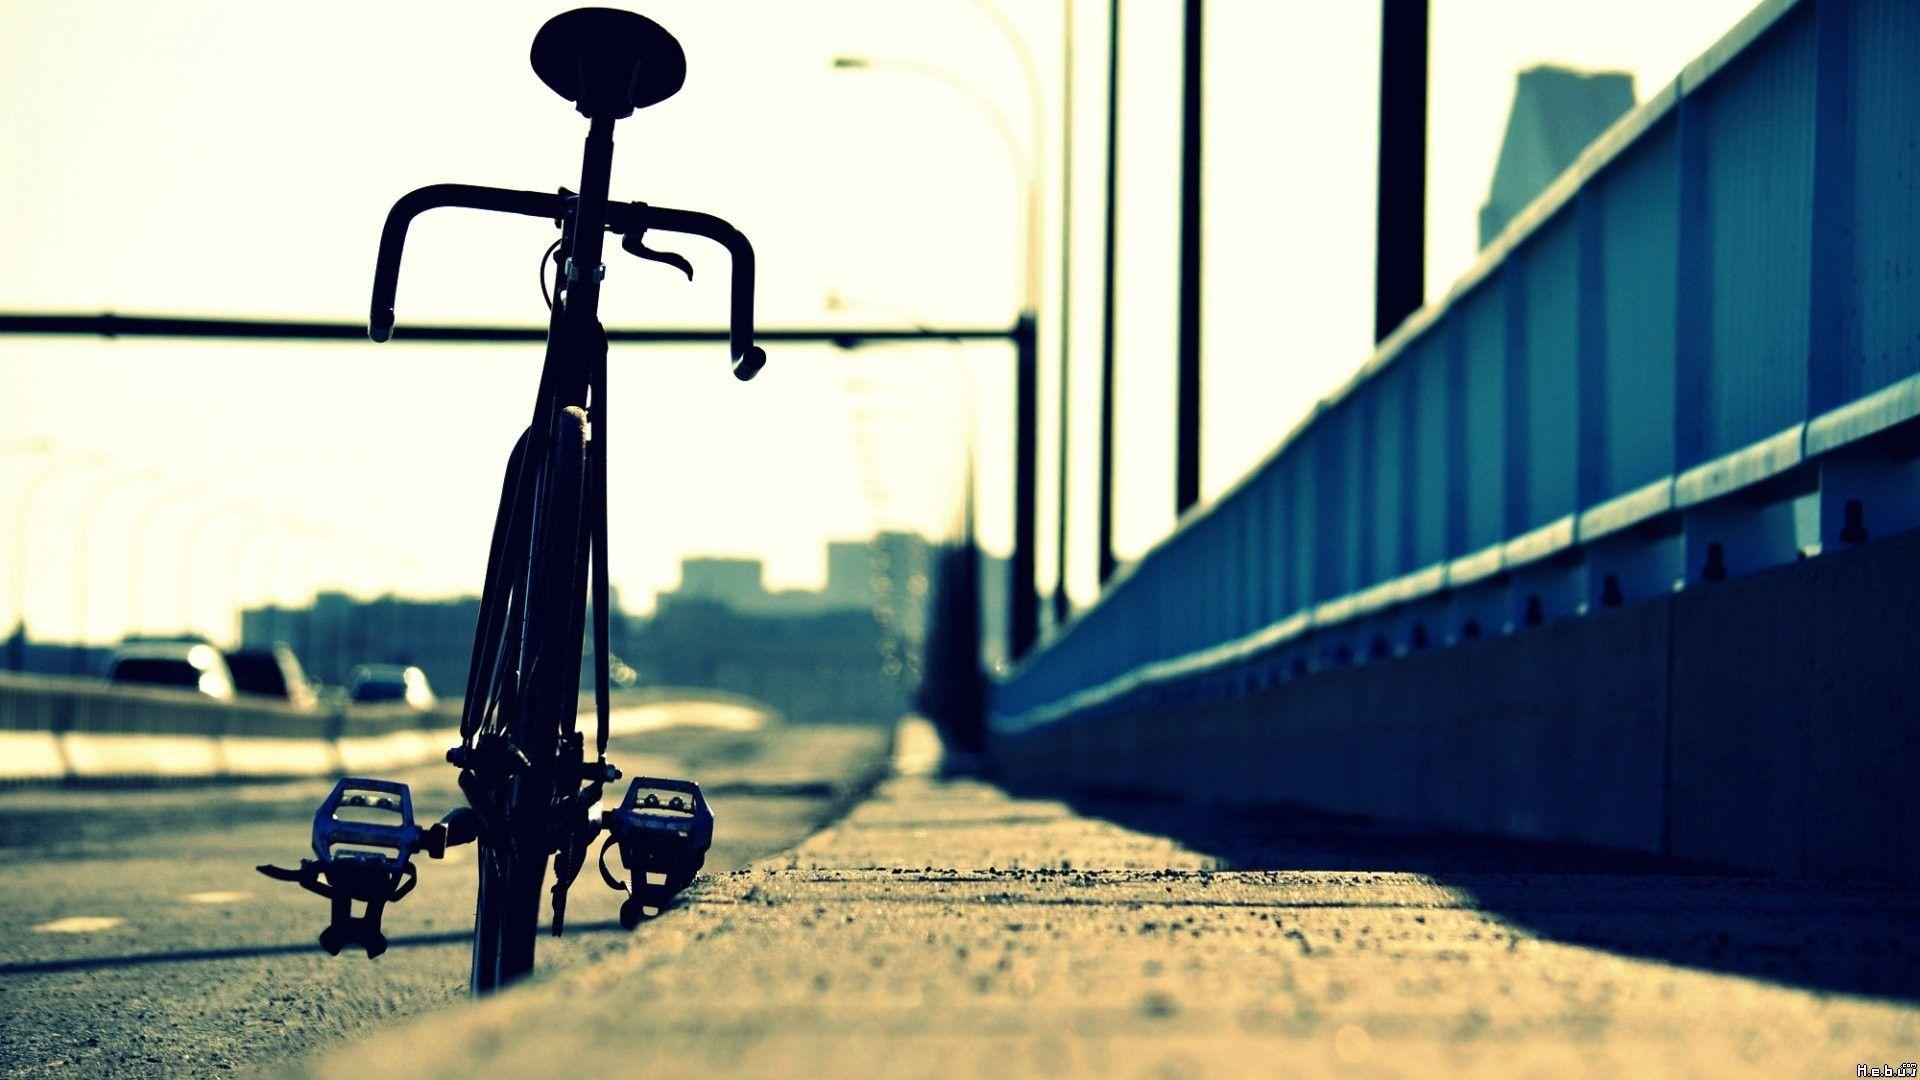 HD Creative Bicycle Picture, Full HD Wallpaper